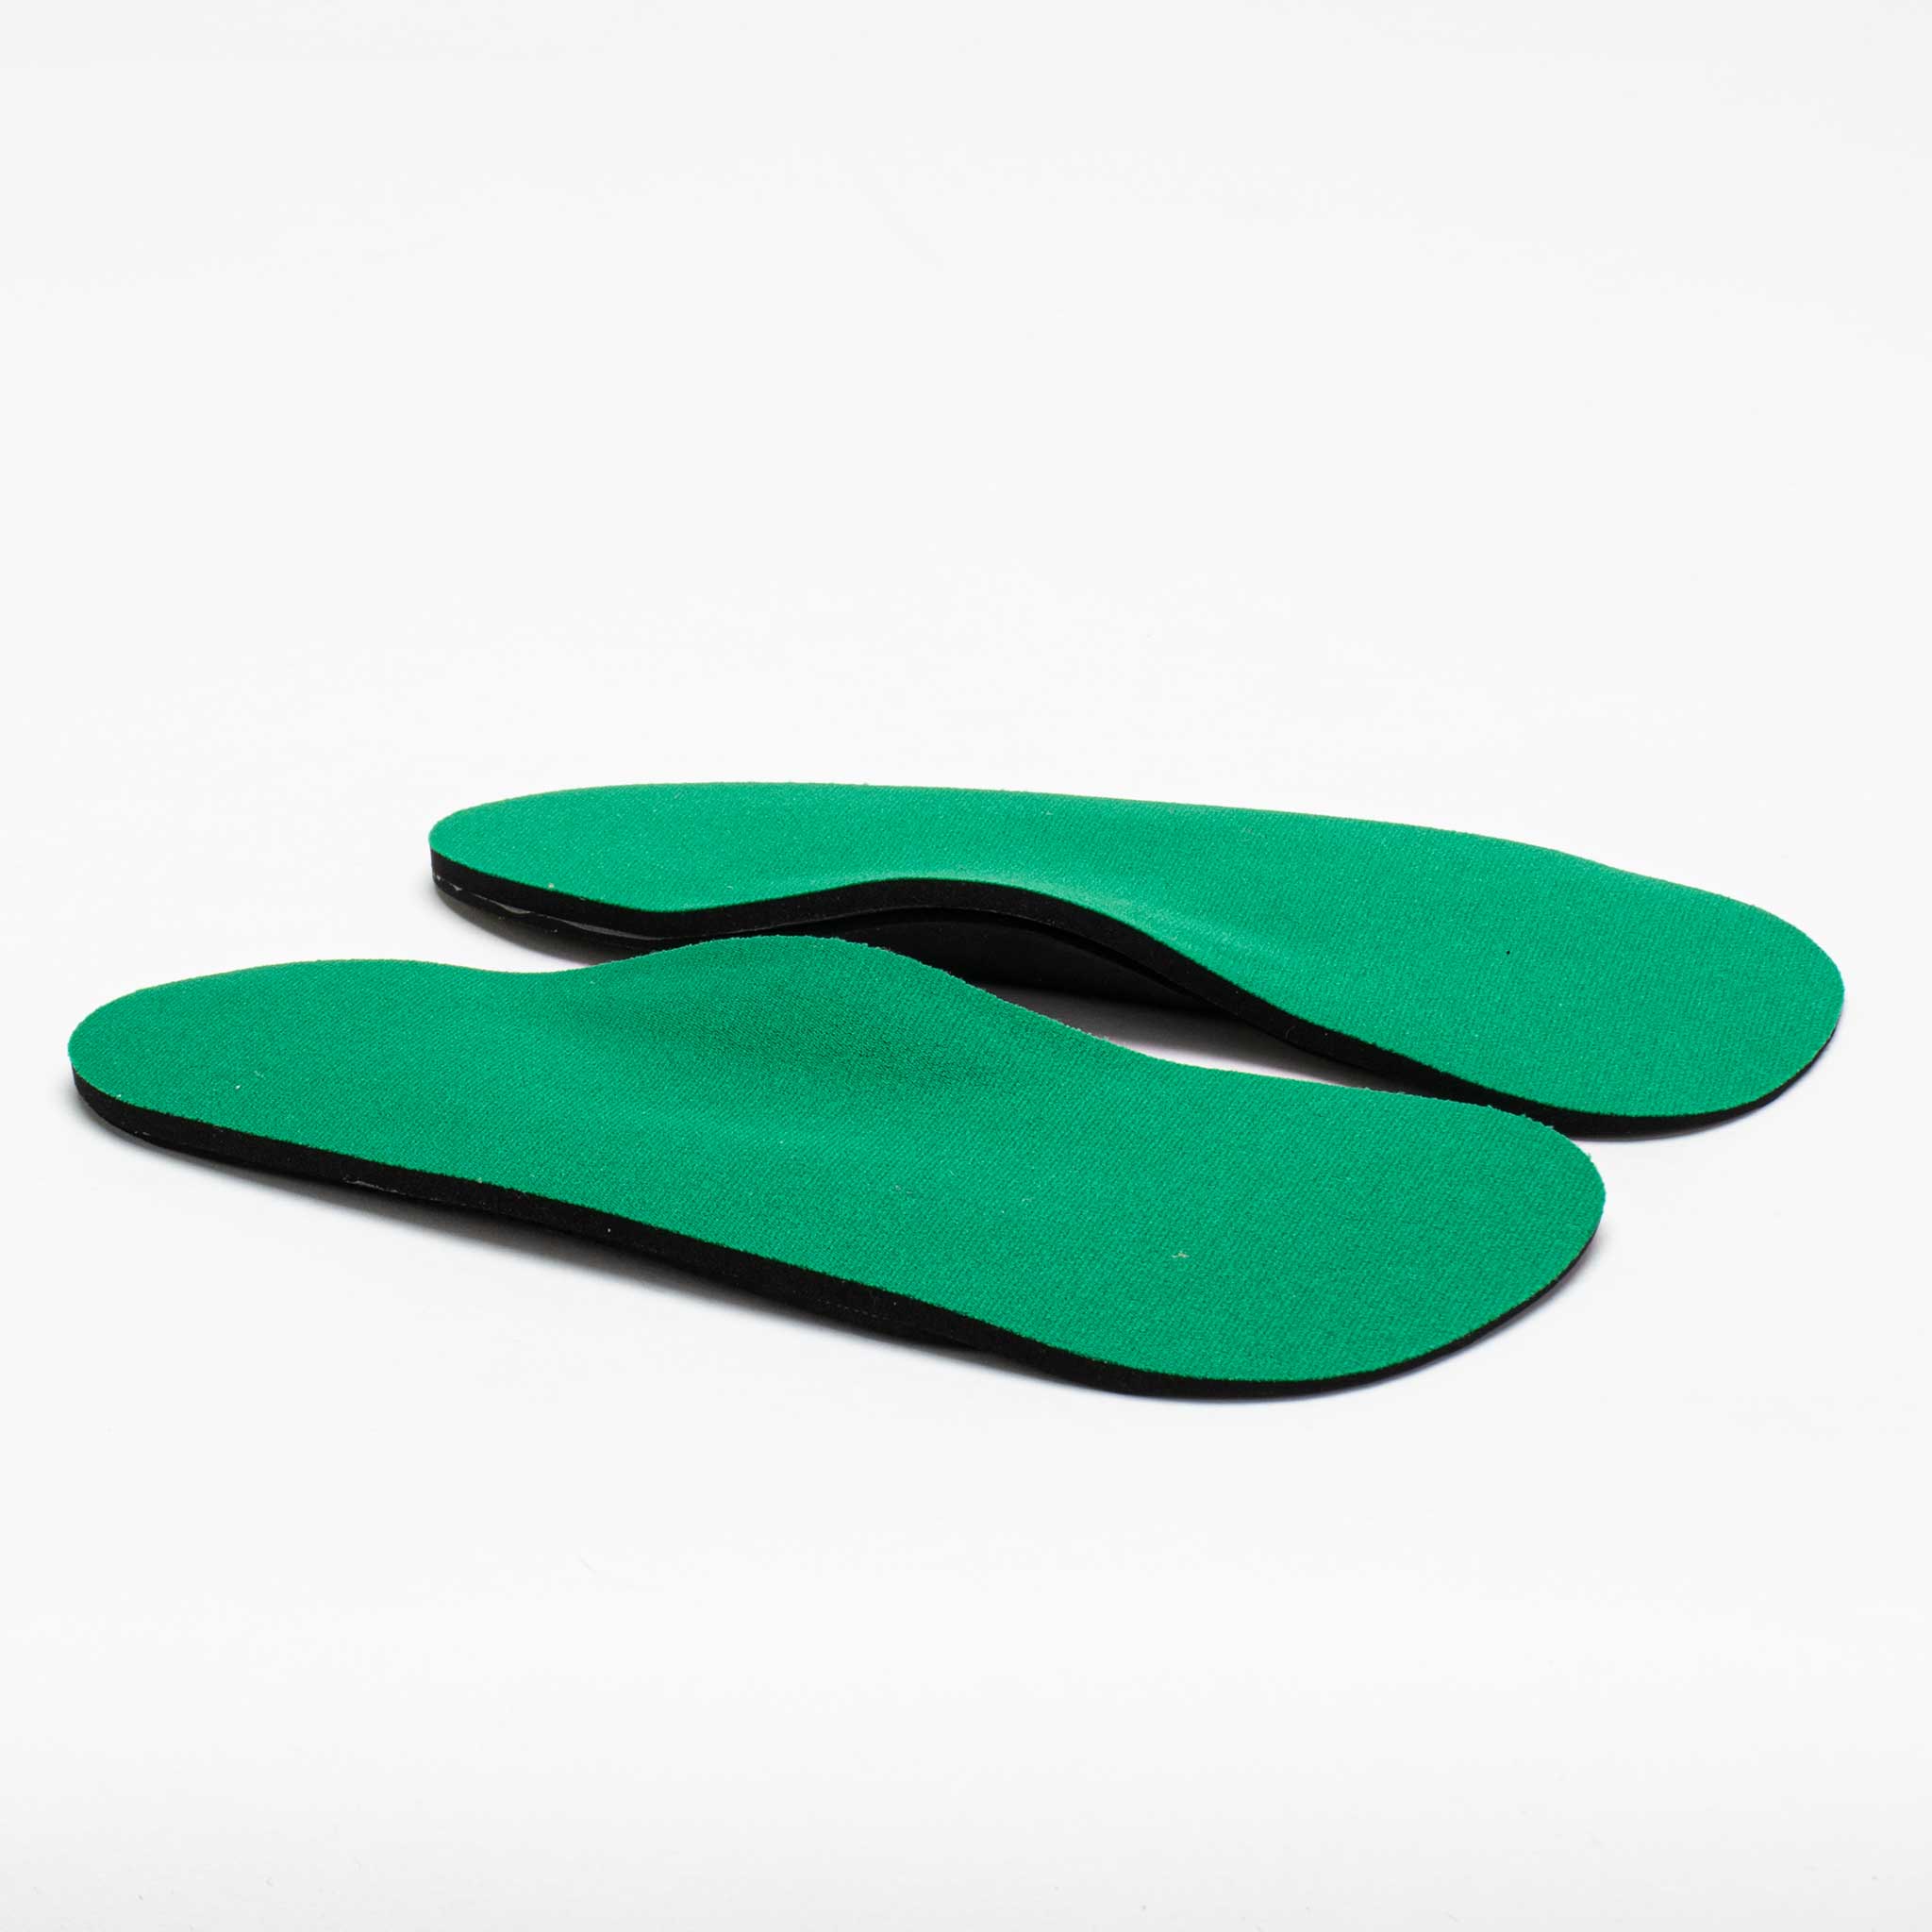 Spenco RX Arch Cushions 3/4 Length Insole